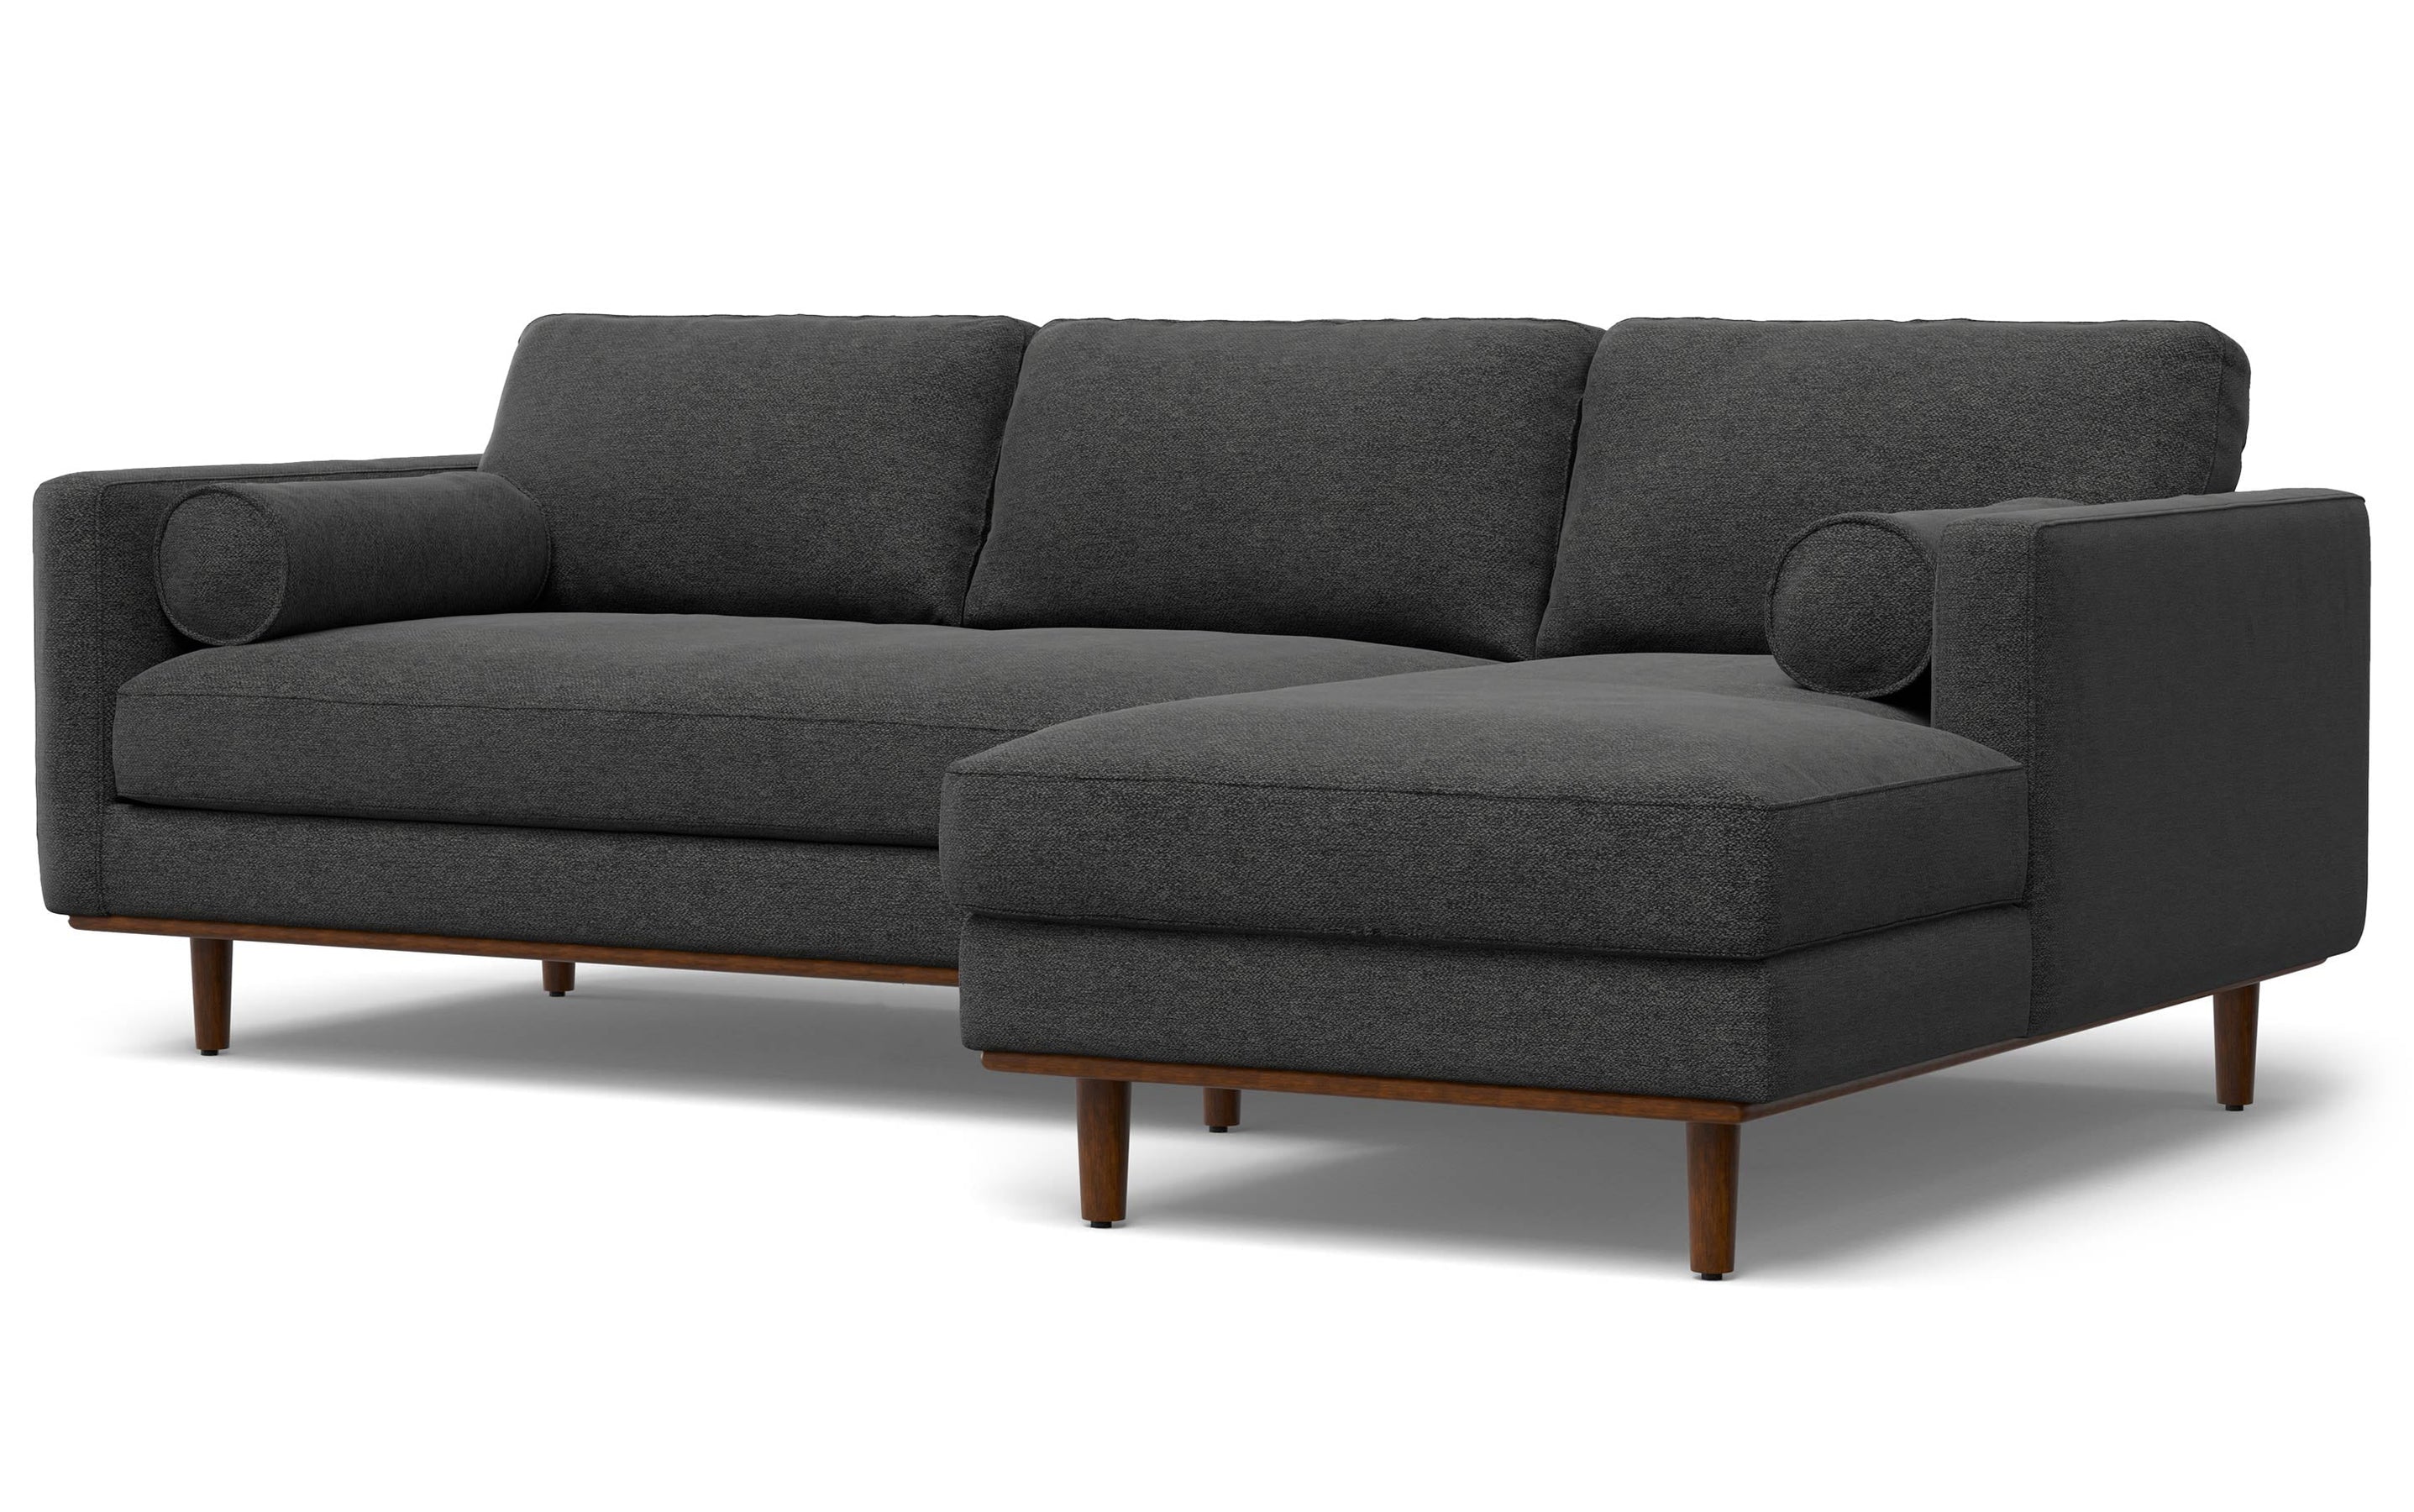 Charcoal Grey Woven-Blend Fabric | Morrison Mid Century Sectional